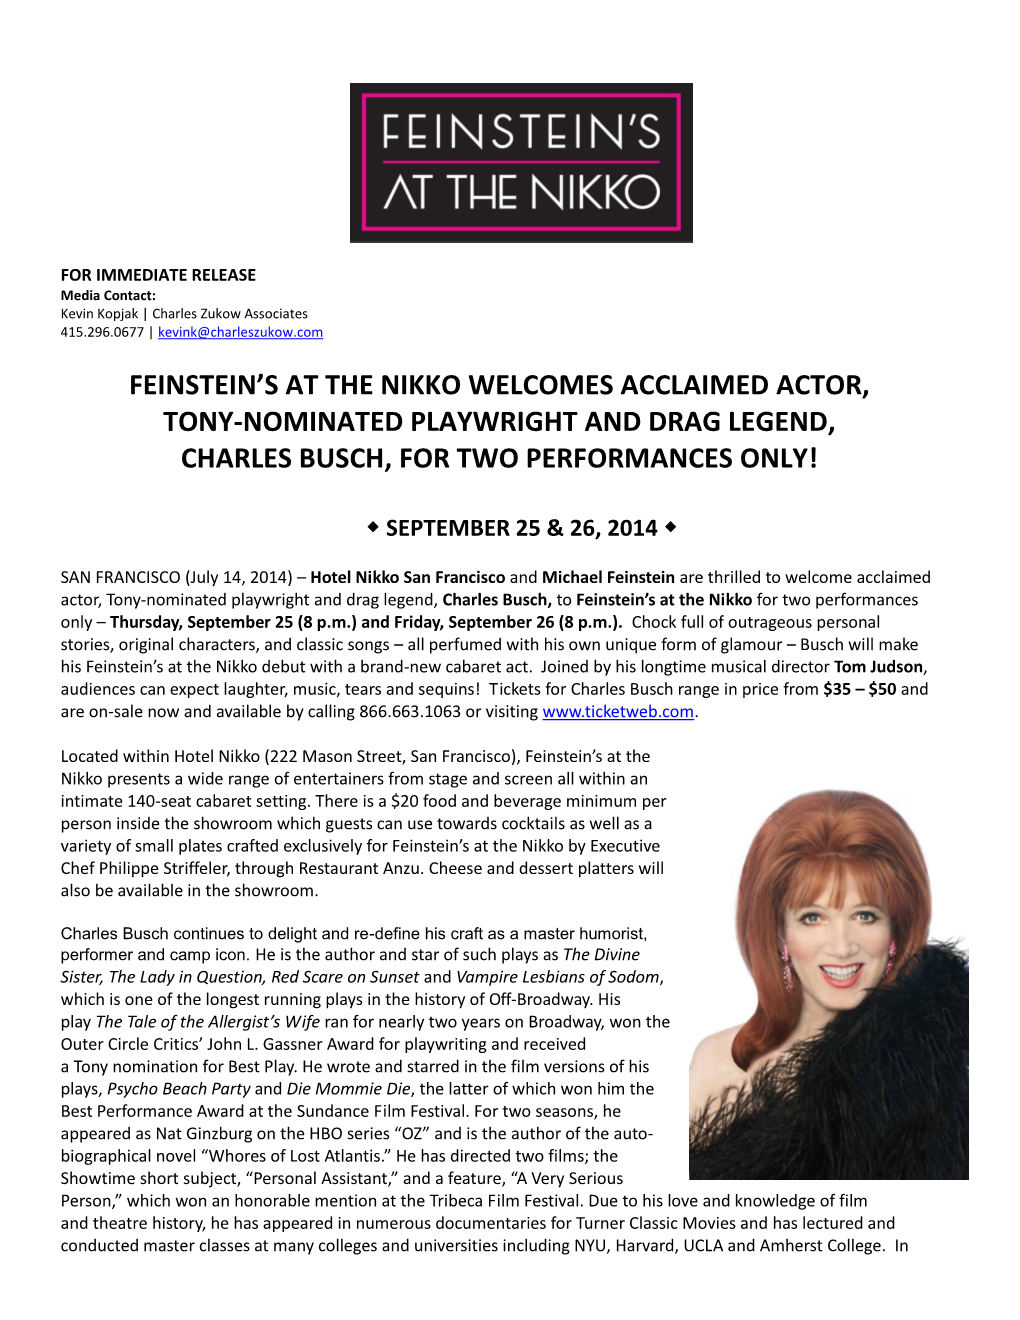 Feinstein's at the Nikko Welcomes Acclaimed Actor